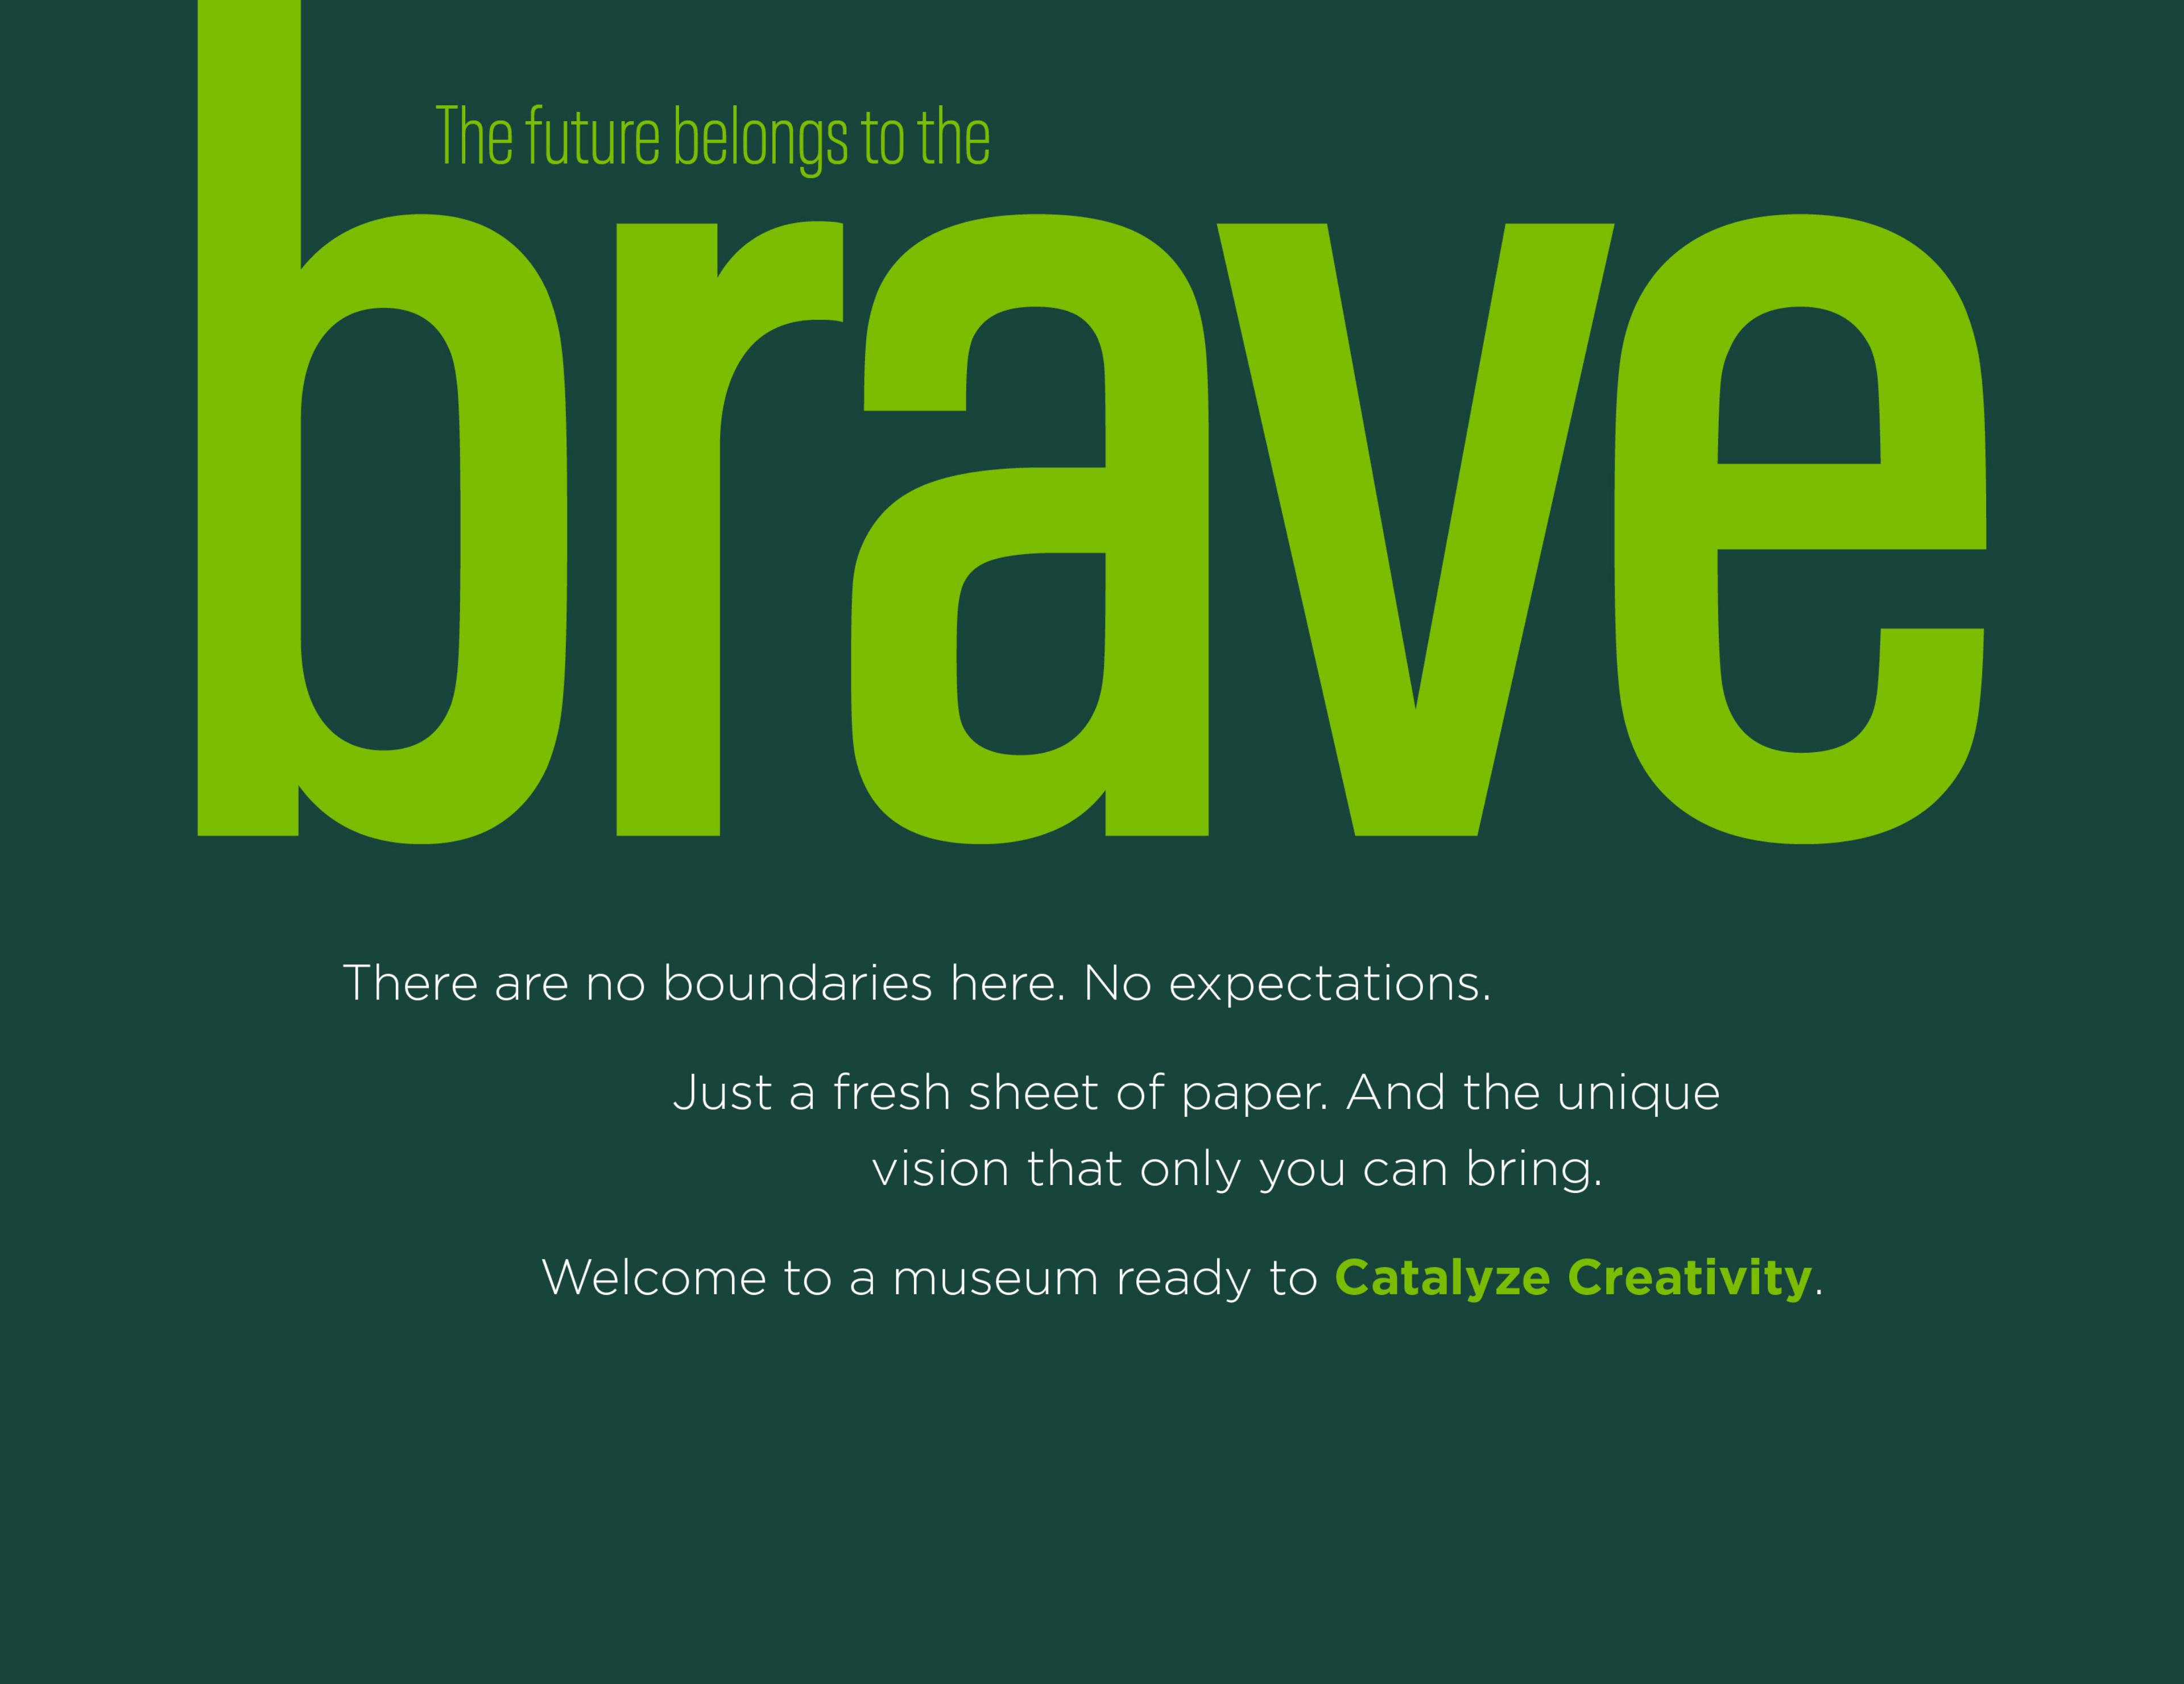 a page from the identity guide - 'The future belongs to the brave... Welcome to a museum ready to Catalize Creativity'